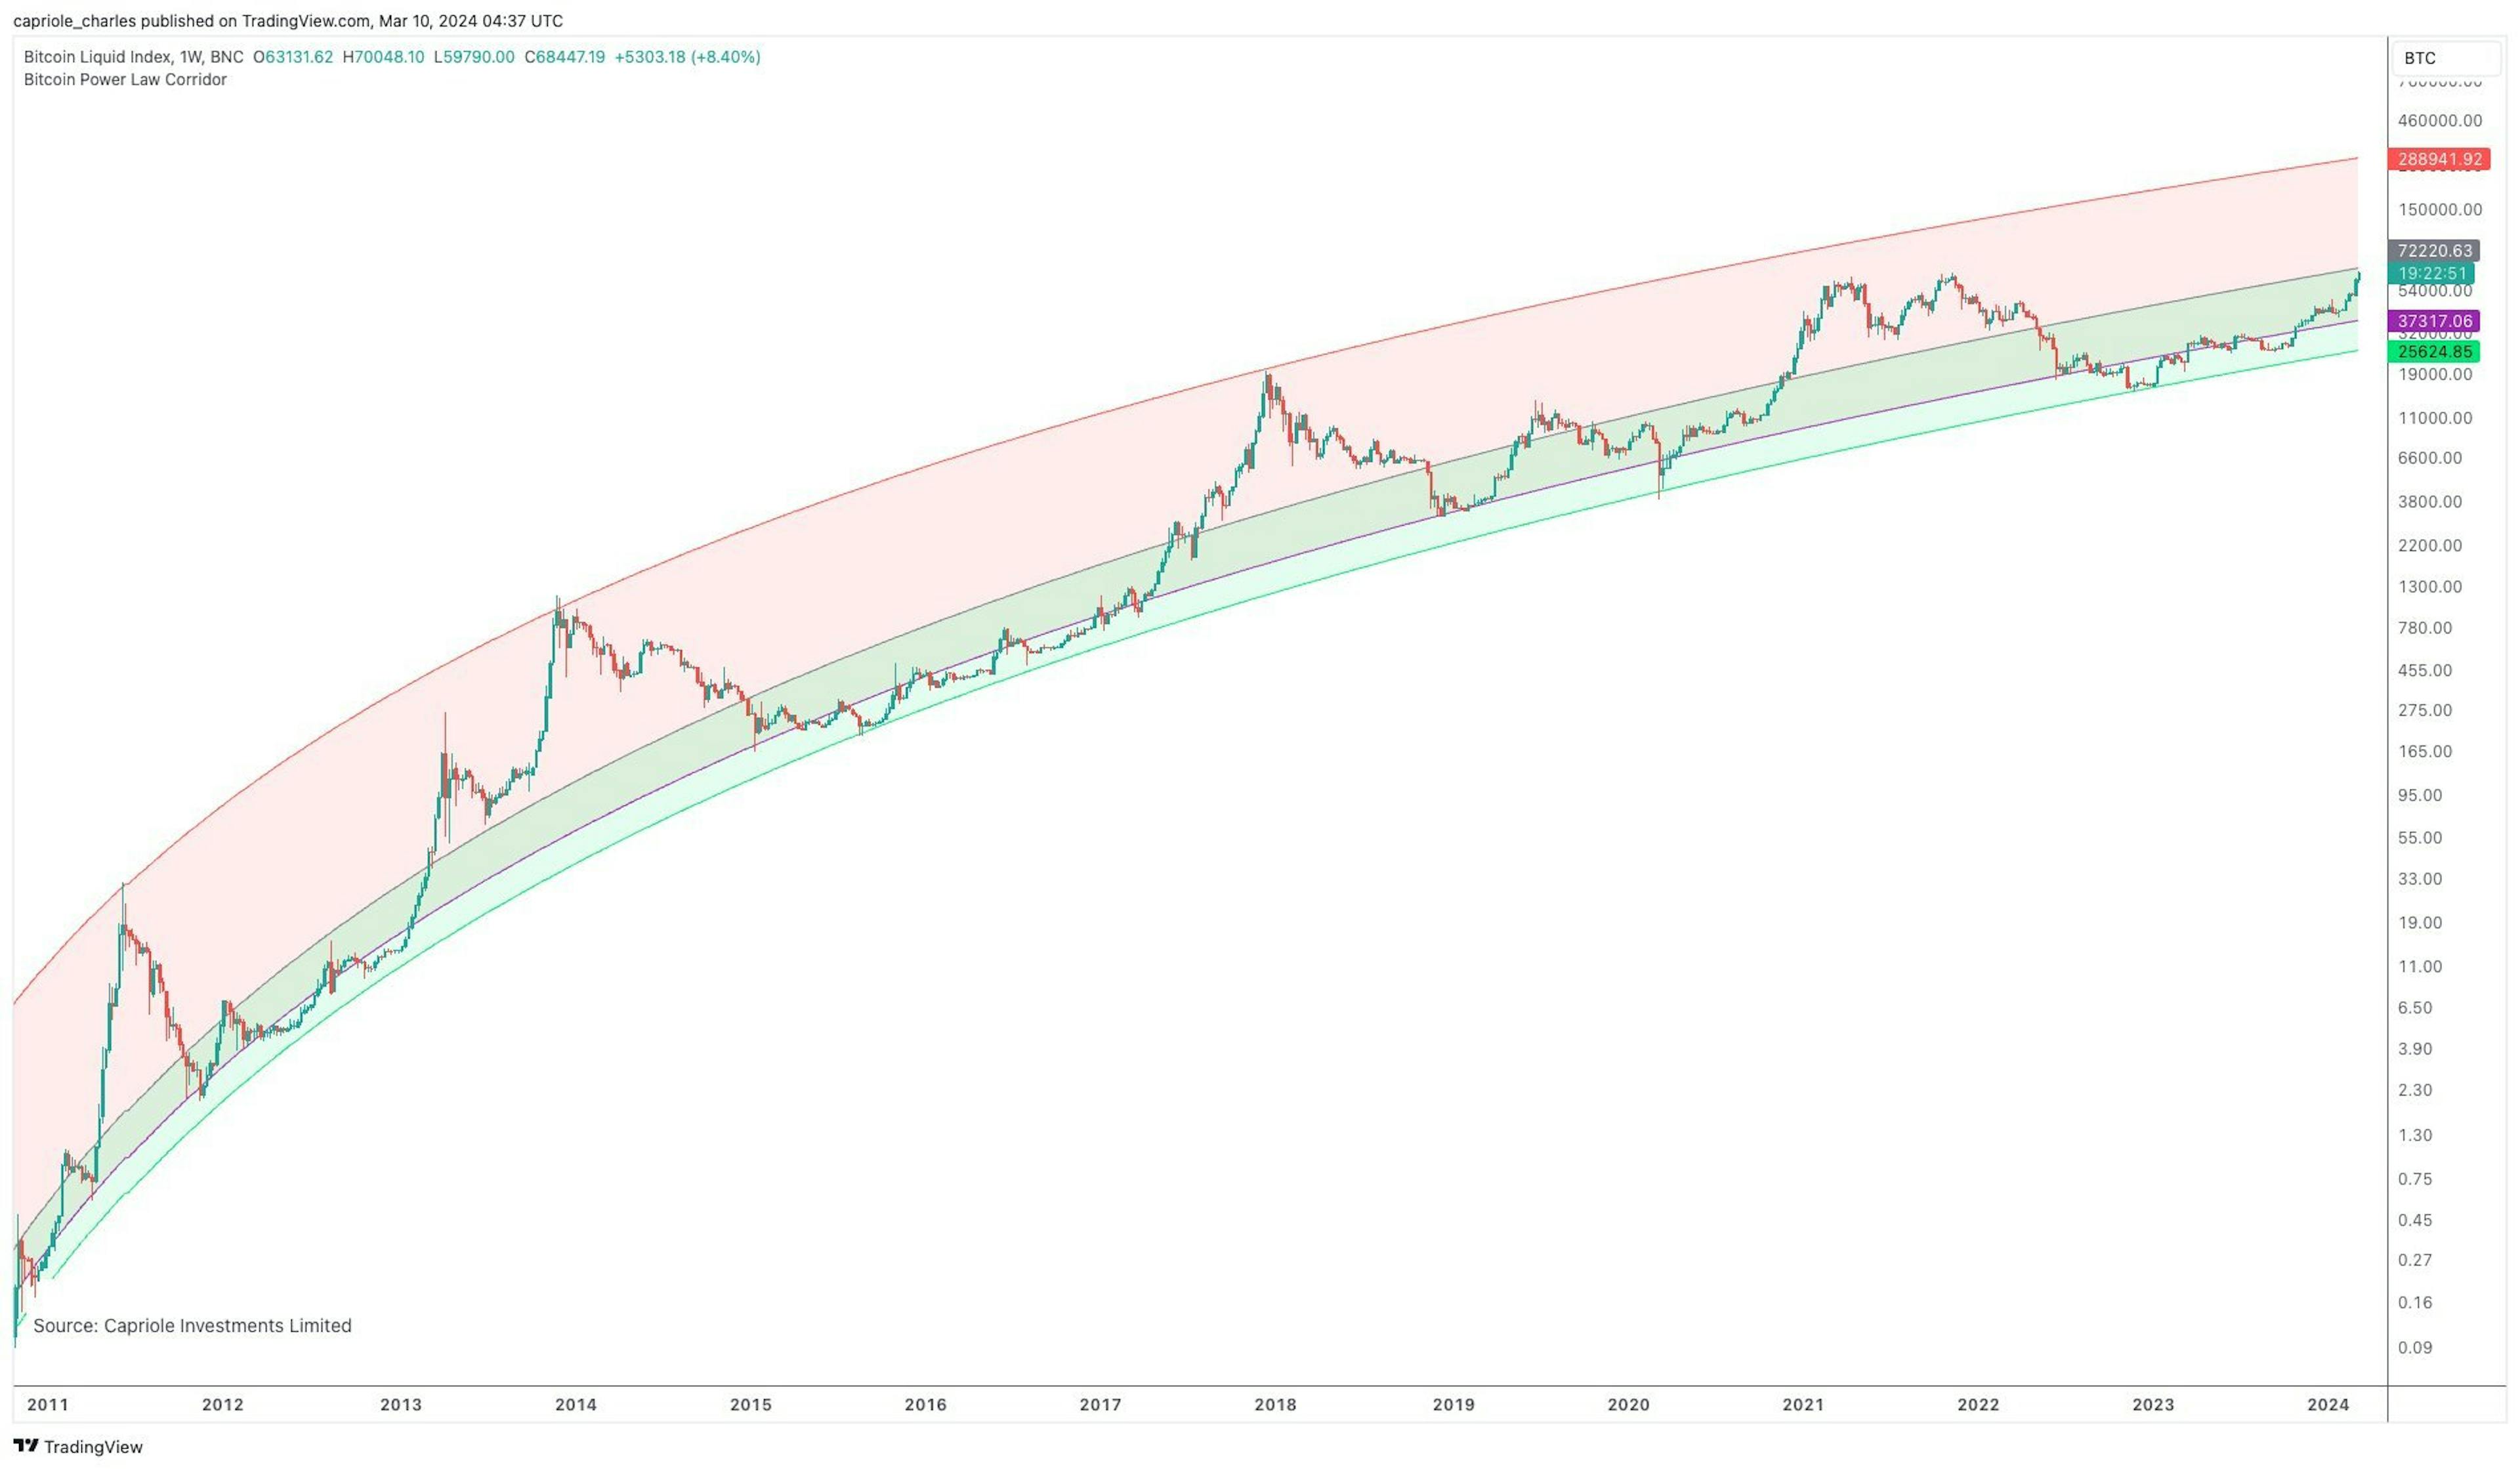 Bitcoin Power Law Corridor, also suggests that we are still in a broad buy zone with a lot of upside potential to come.